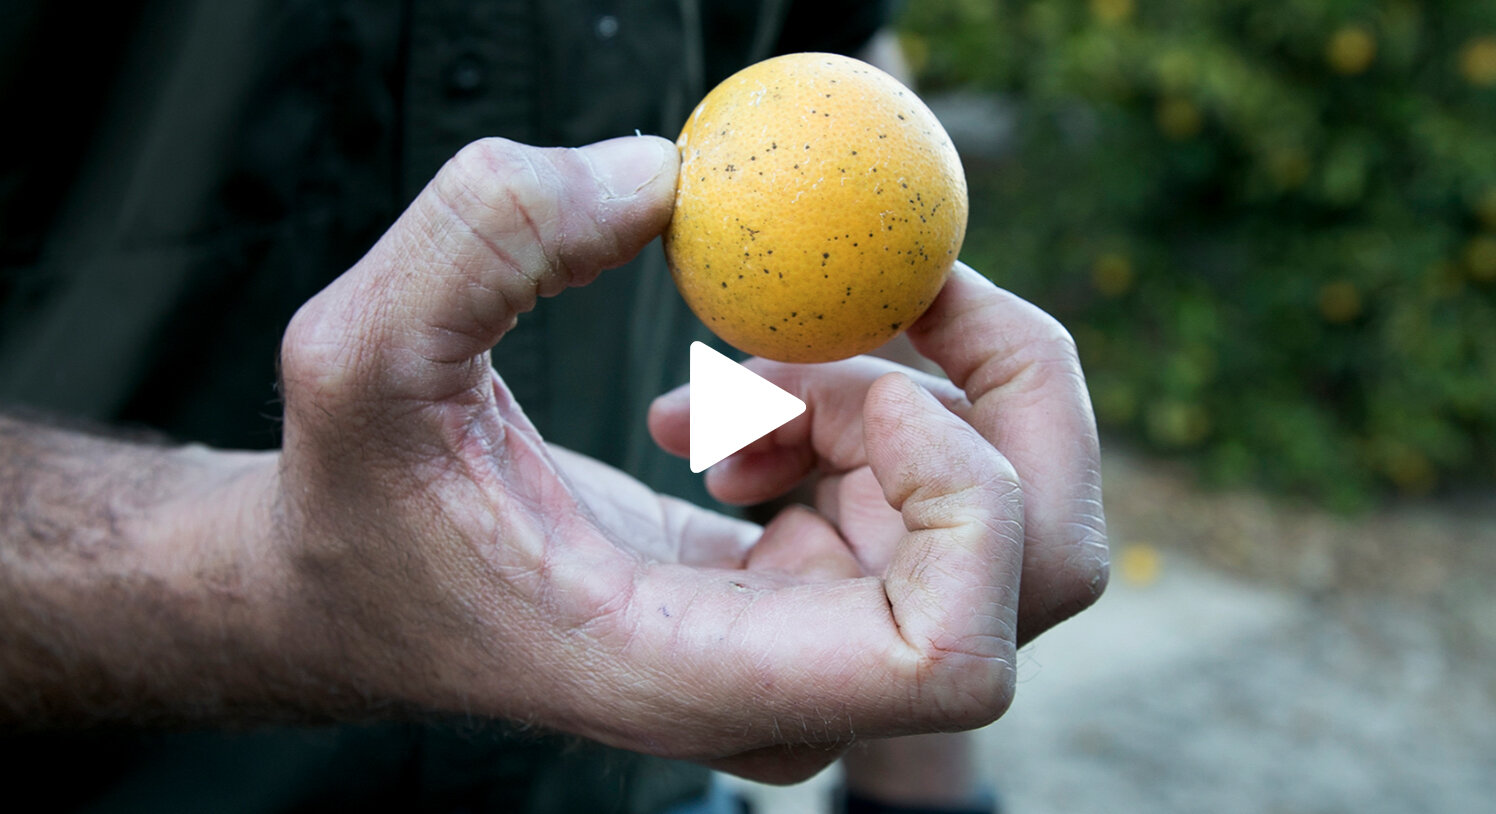 Is Florida Citrus As We Know It Gone?